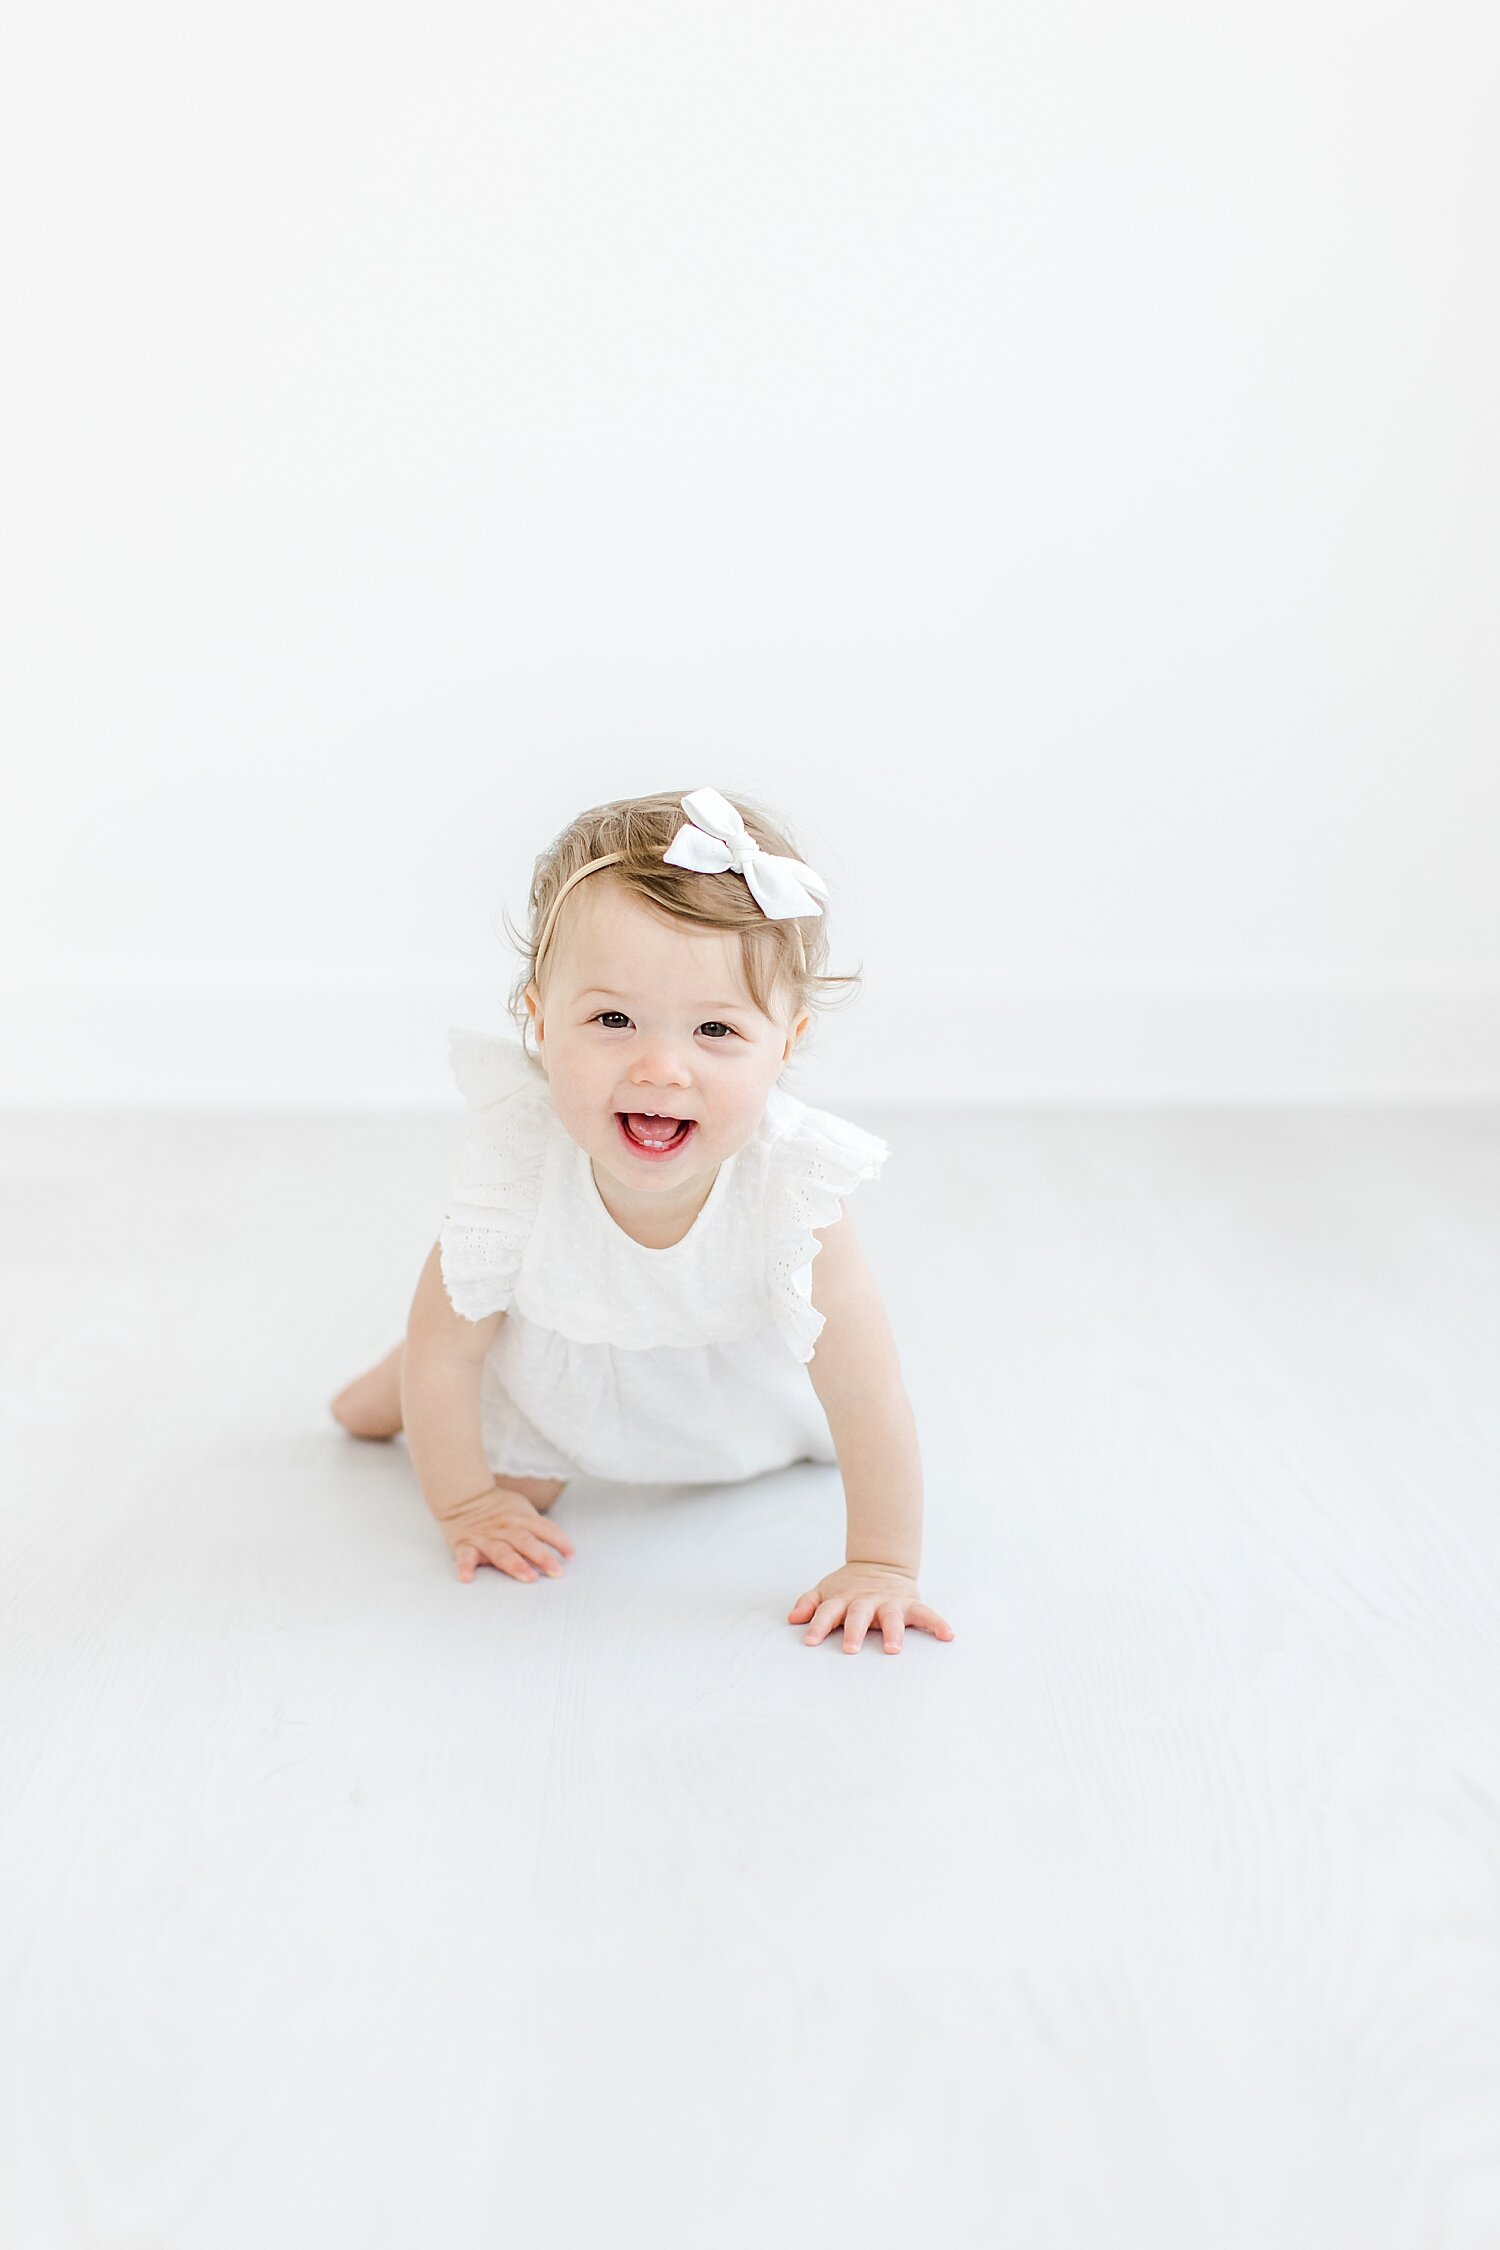 One-year-old crawling during first birthday photoshoot. Photo by Kristin Wood Photography.